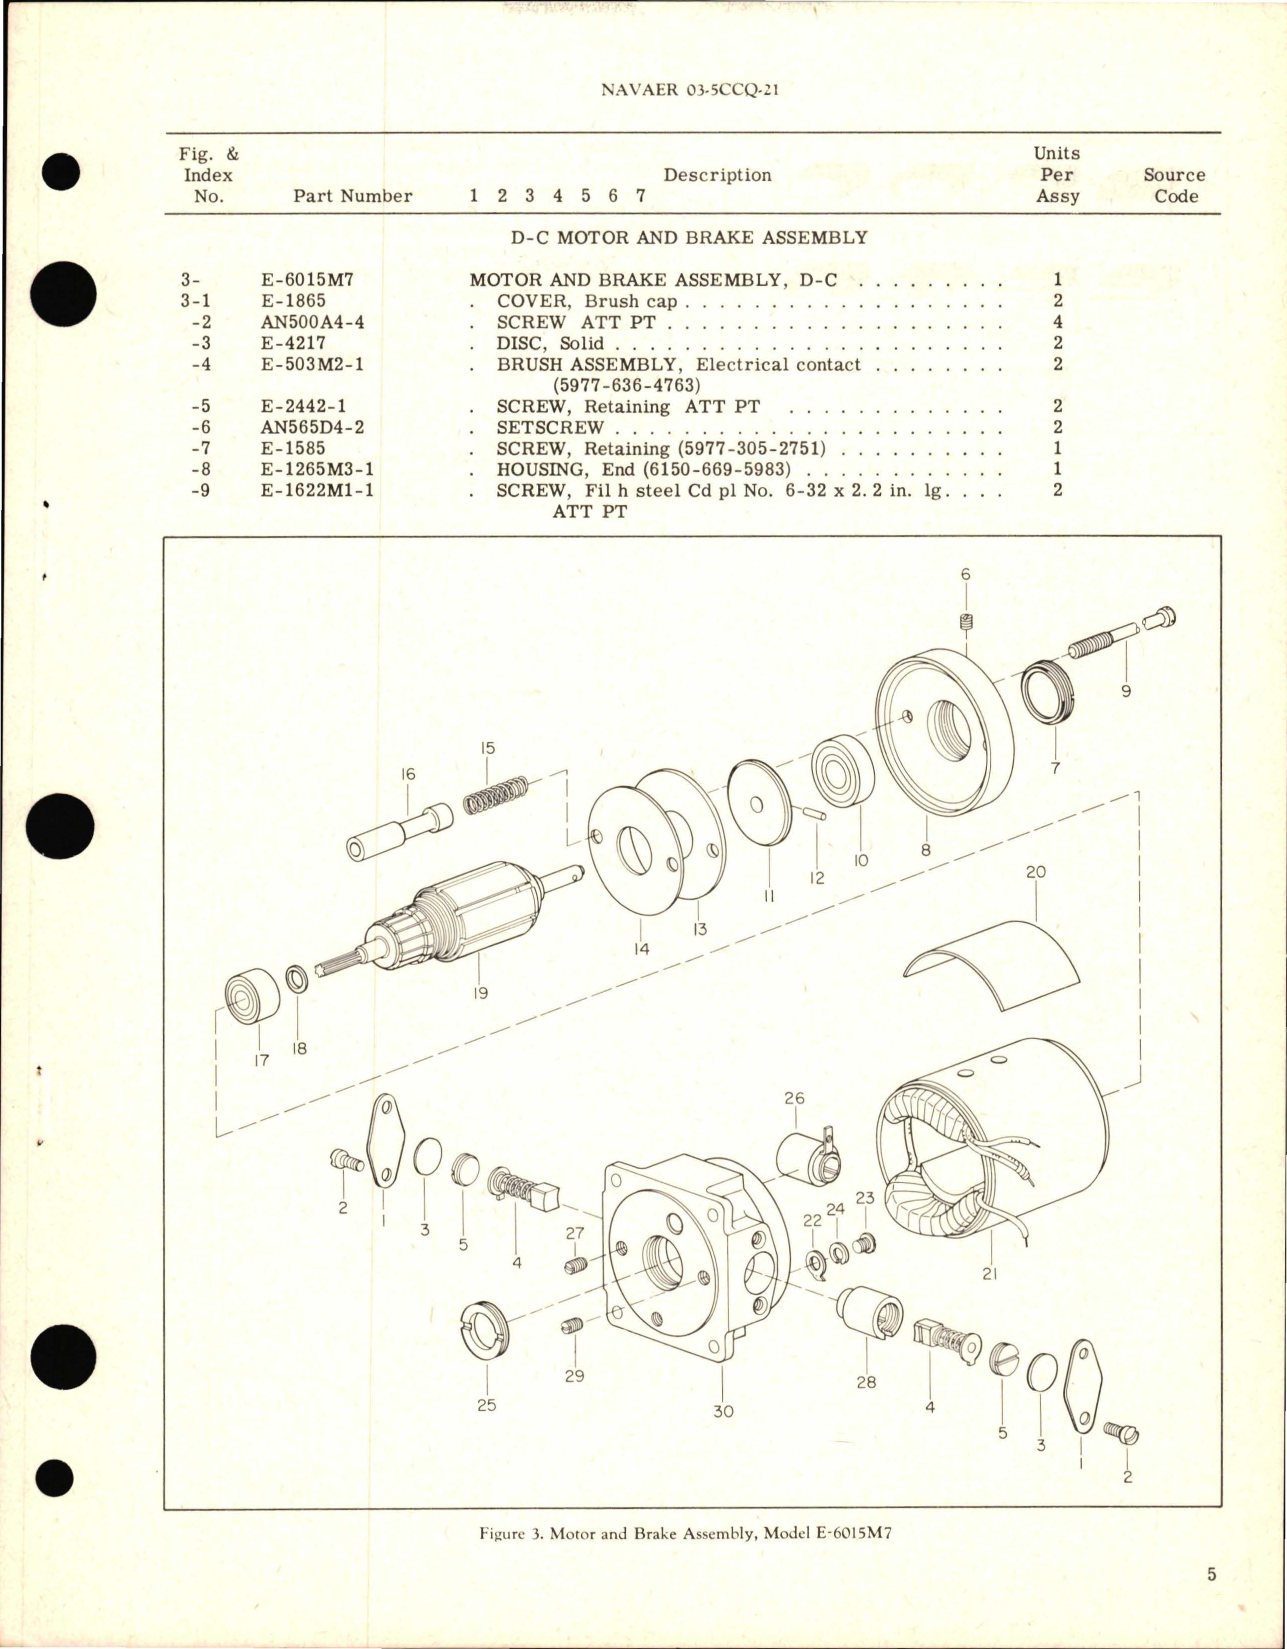 Sample page 5 from AirCorps Library document: Overhaul Instructions with Parts Breakdown for D-C Motor and Brake Assembly - Model E-6015M7